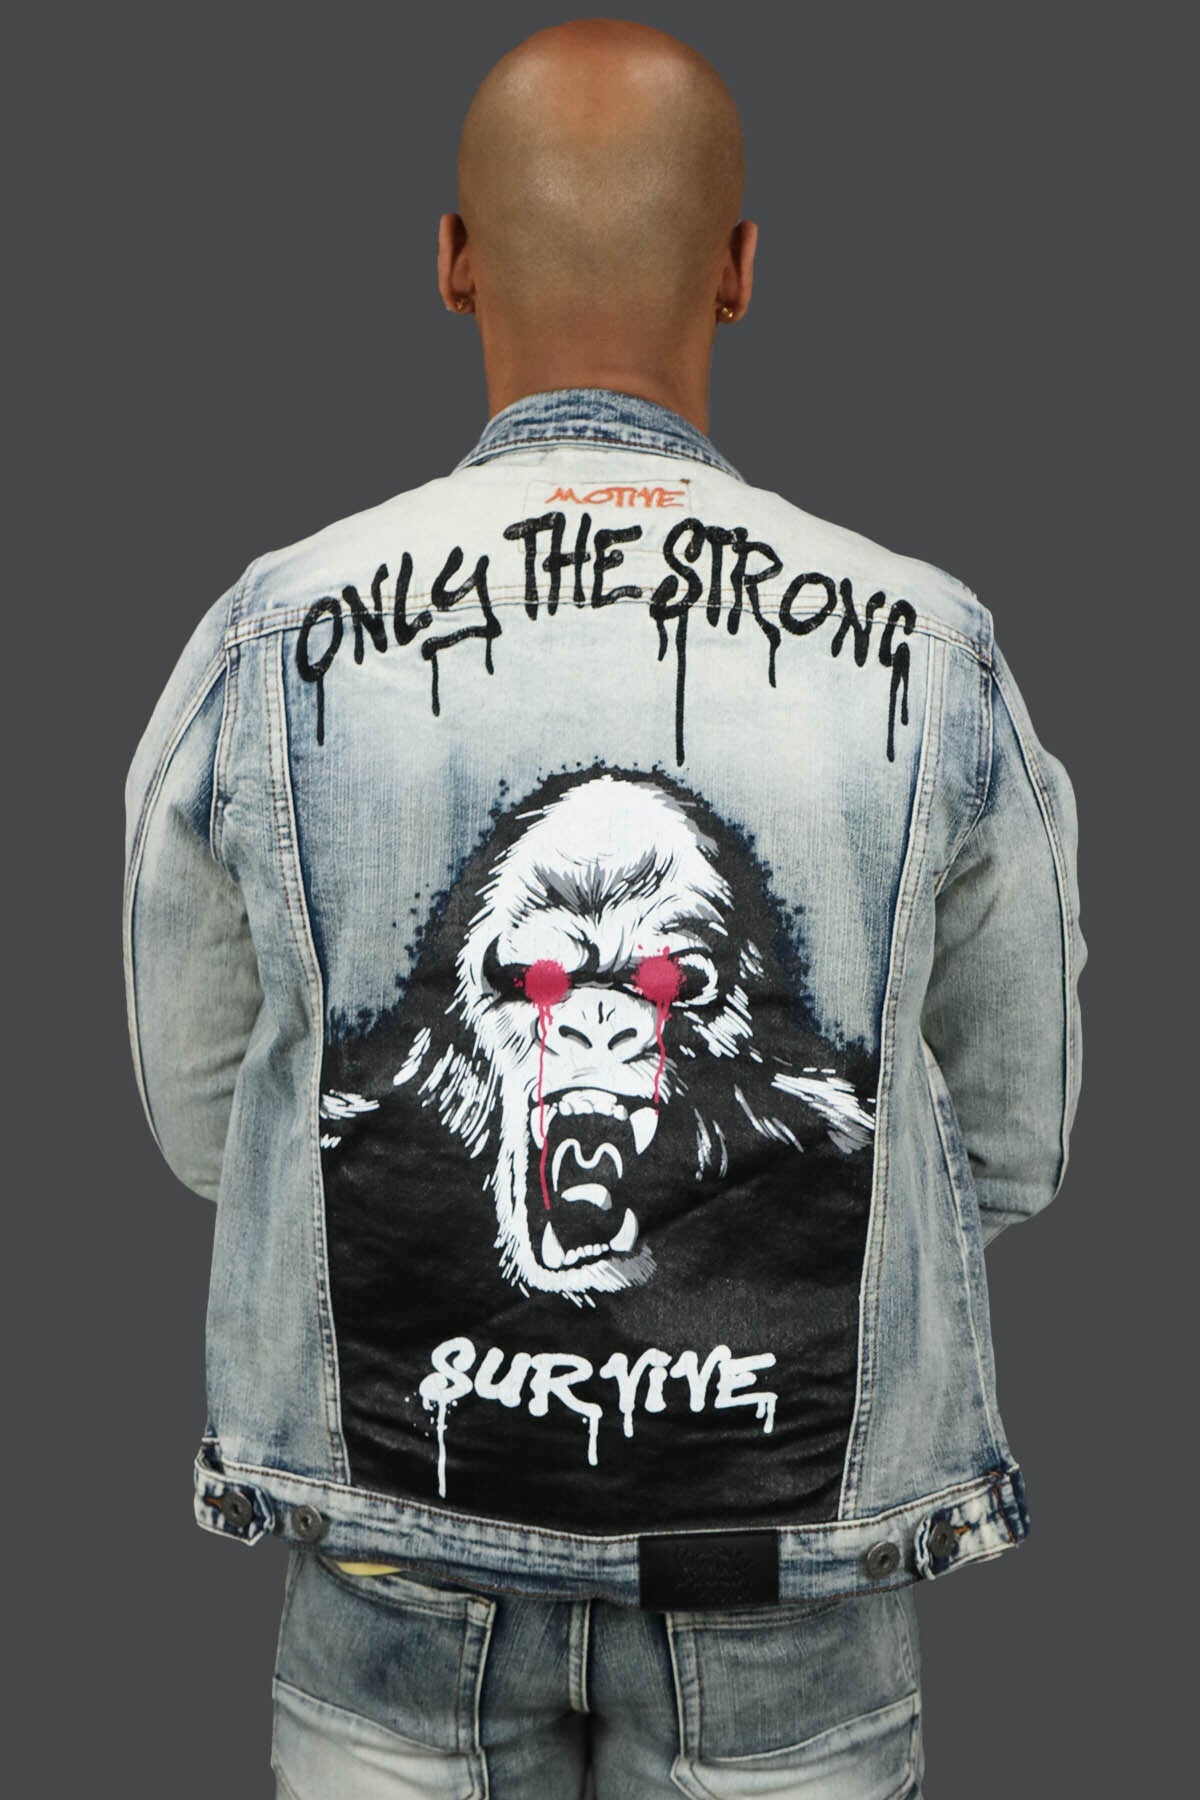 The back of the Only The Strong Custom Spray Painted Denim Jacket Motive Denim | Vintage | with the custom spray painted groilla ans spray painted words" Only The Strong Survive"